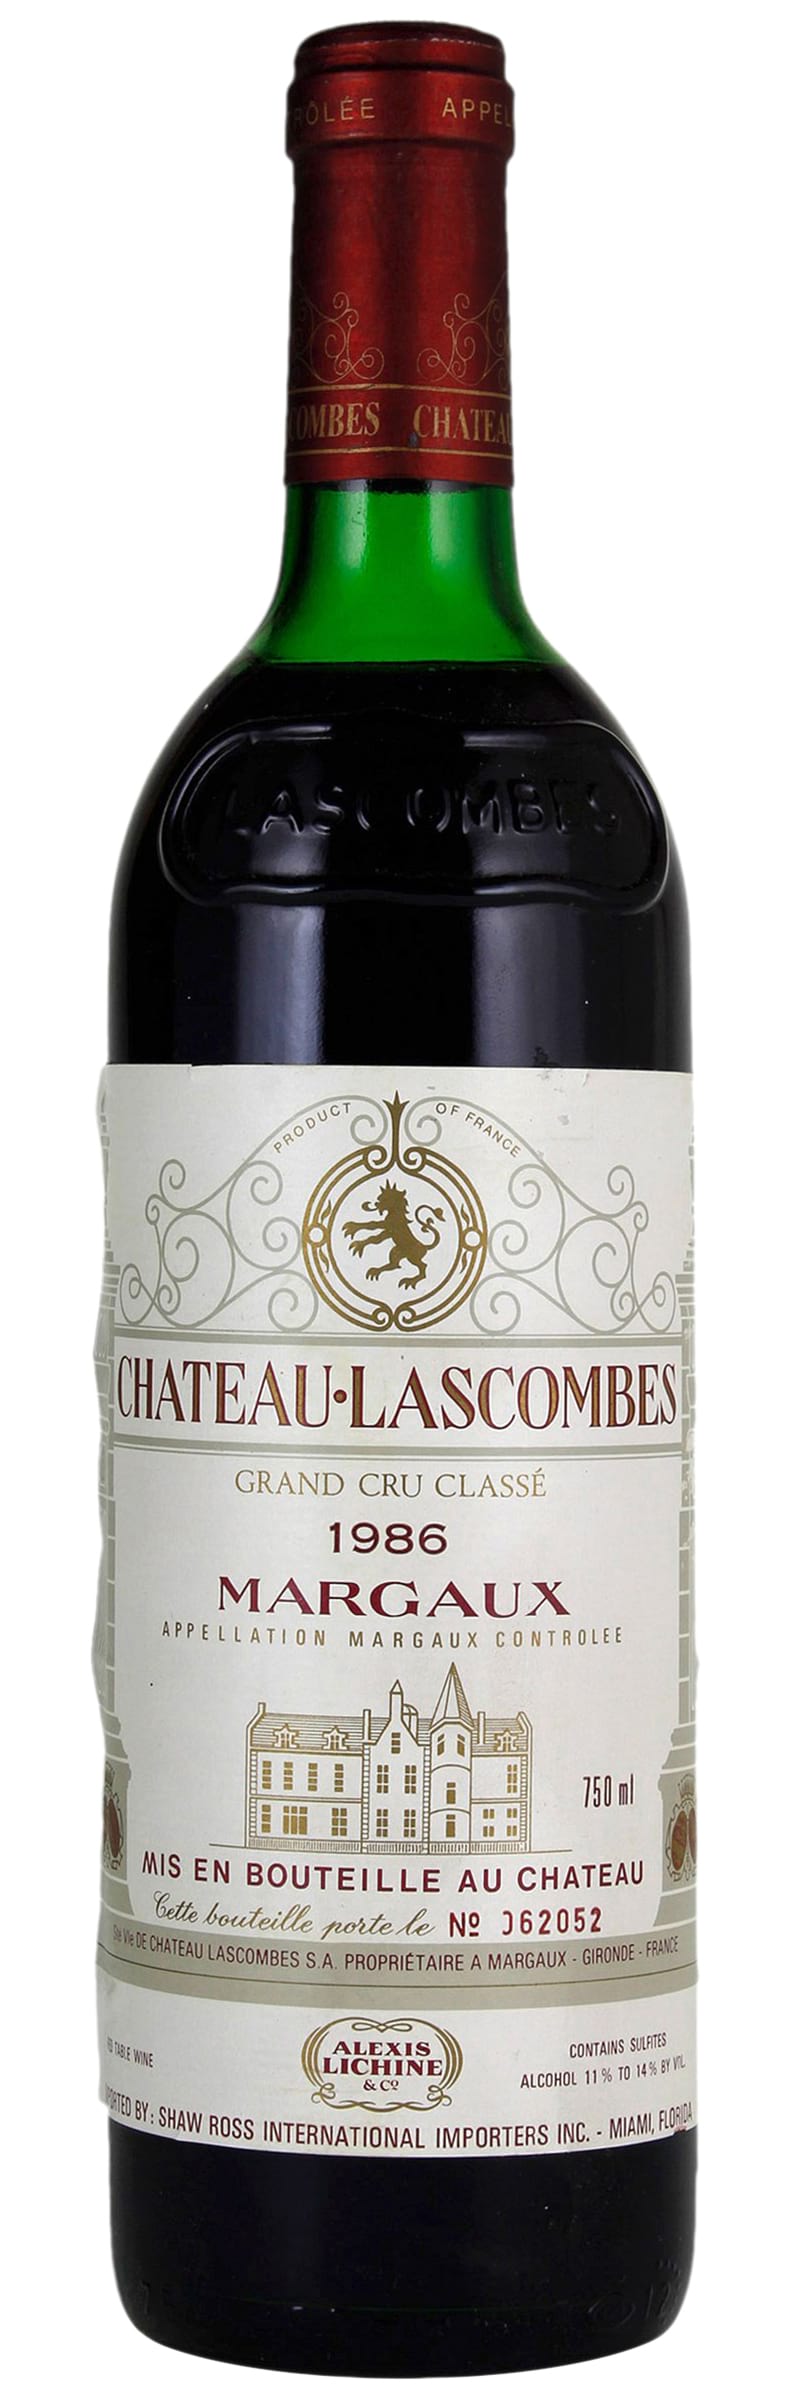 1986 Chateau Lascombes Margaux фото